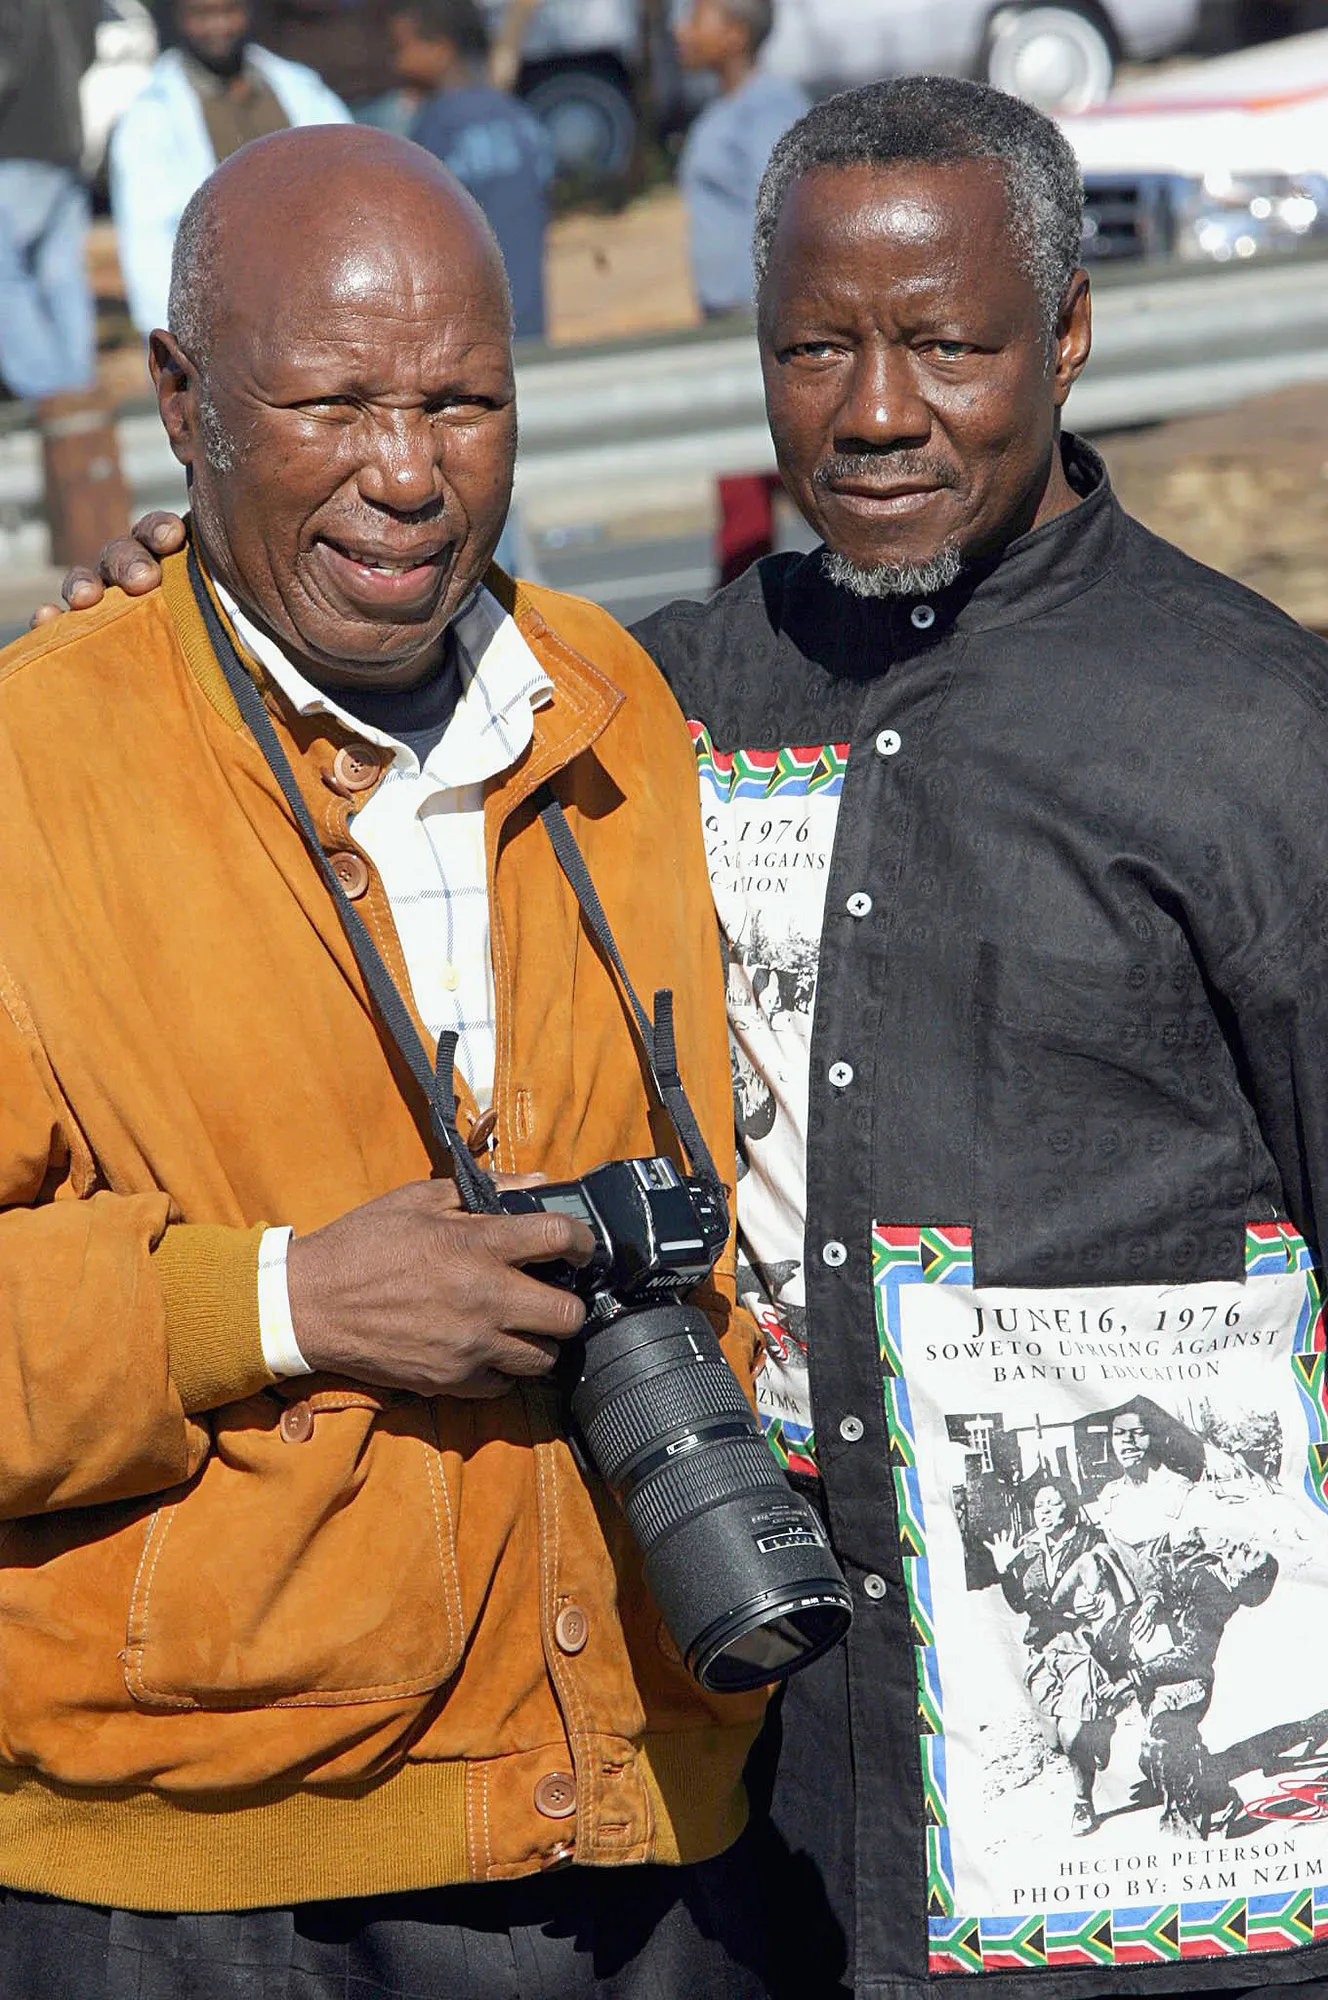 Alf Kumalo and Sam Nzima, wearing a shirt with his iconic Hector Pieterson image printed on his shirt.